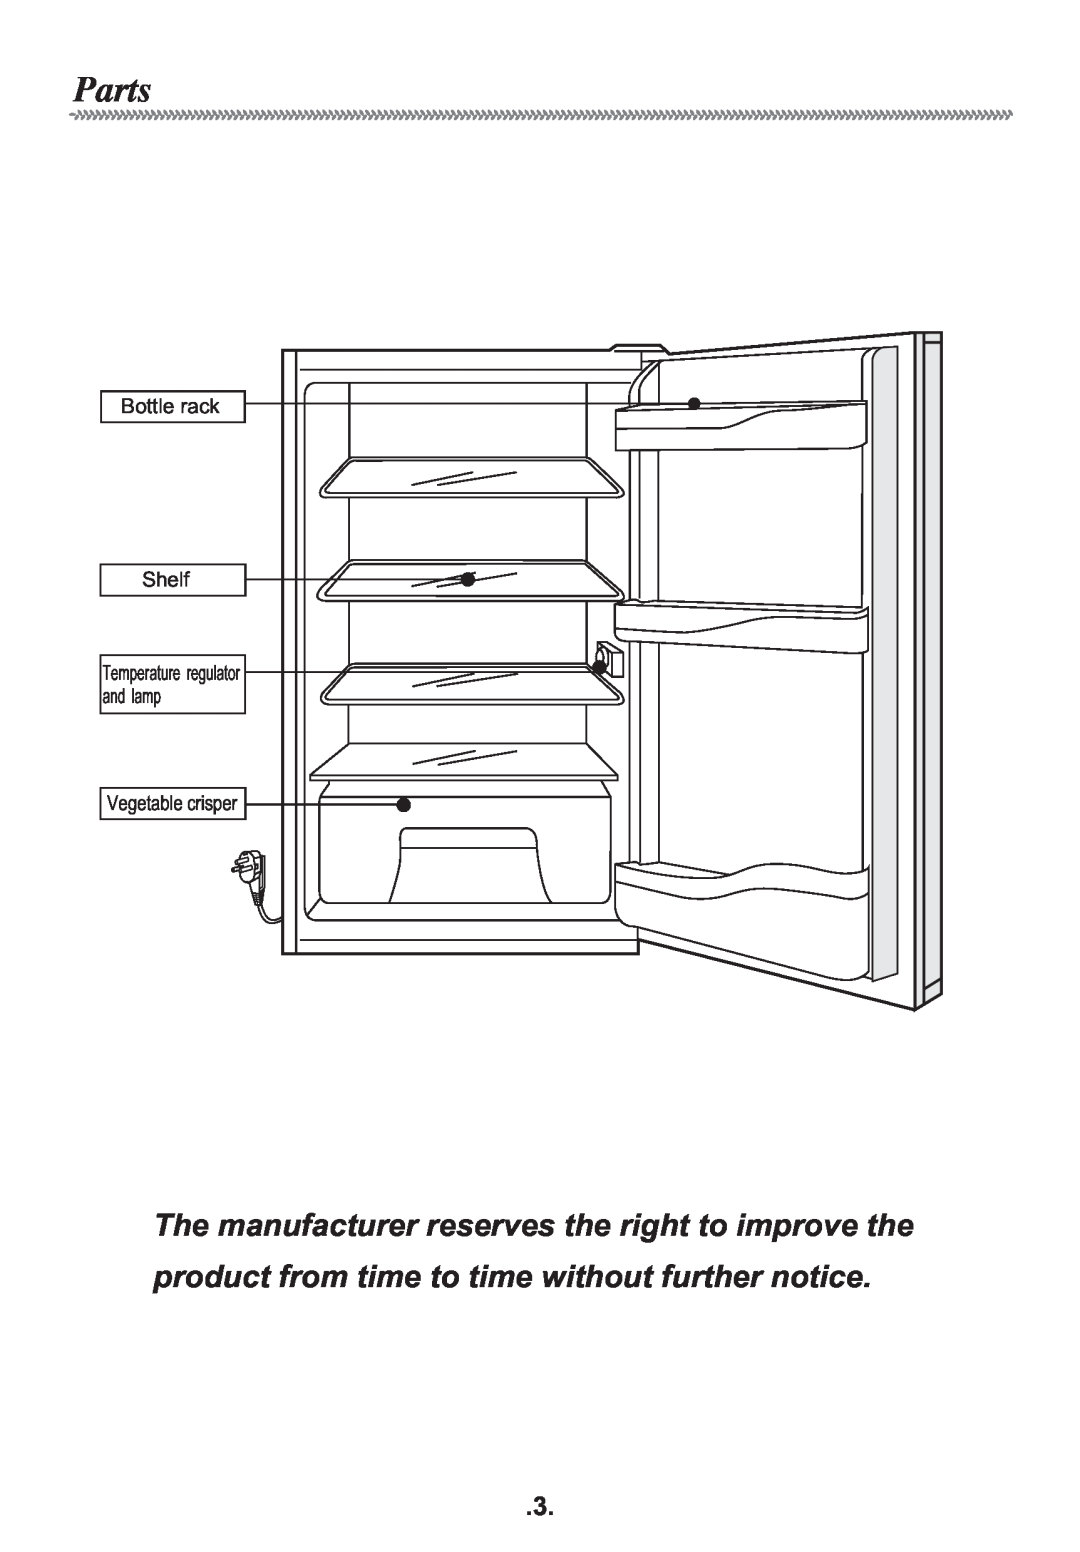 Haier HR-138AR manual Parts, product from time to time without further notice, Bottle rack, Vegetable crisper 